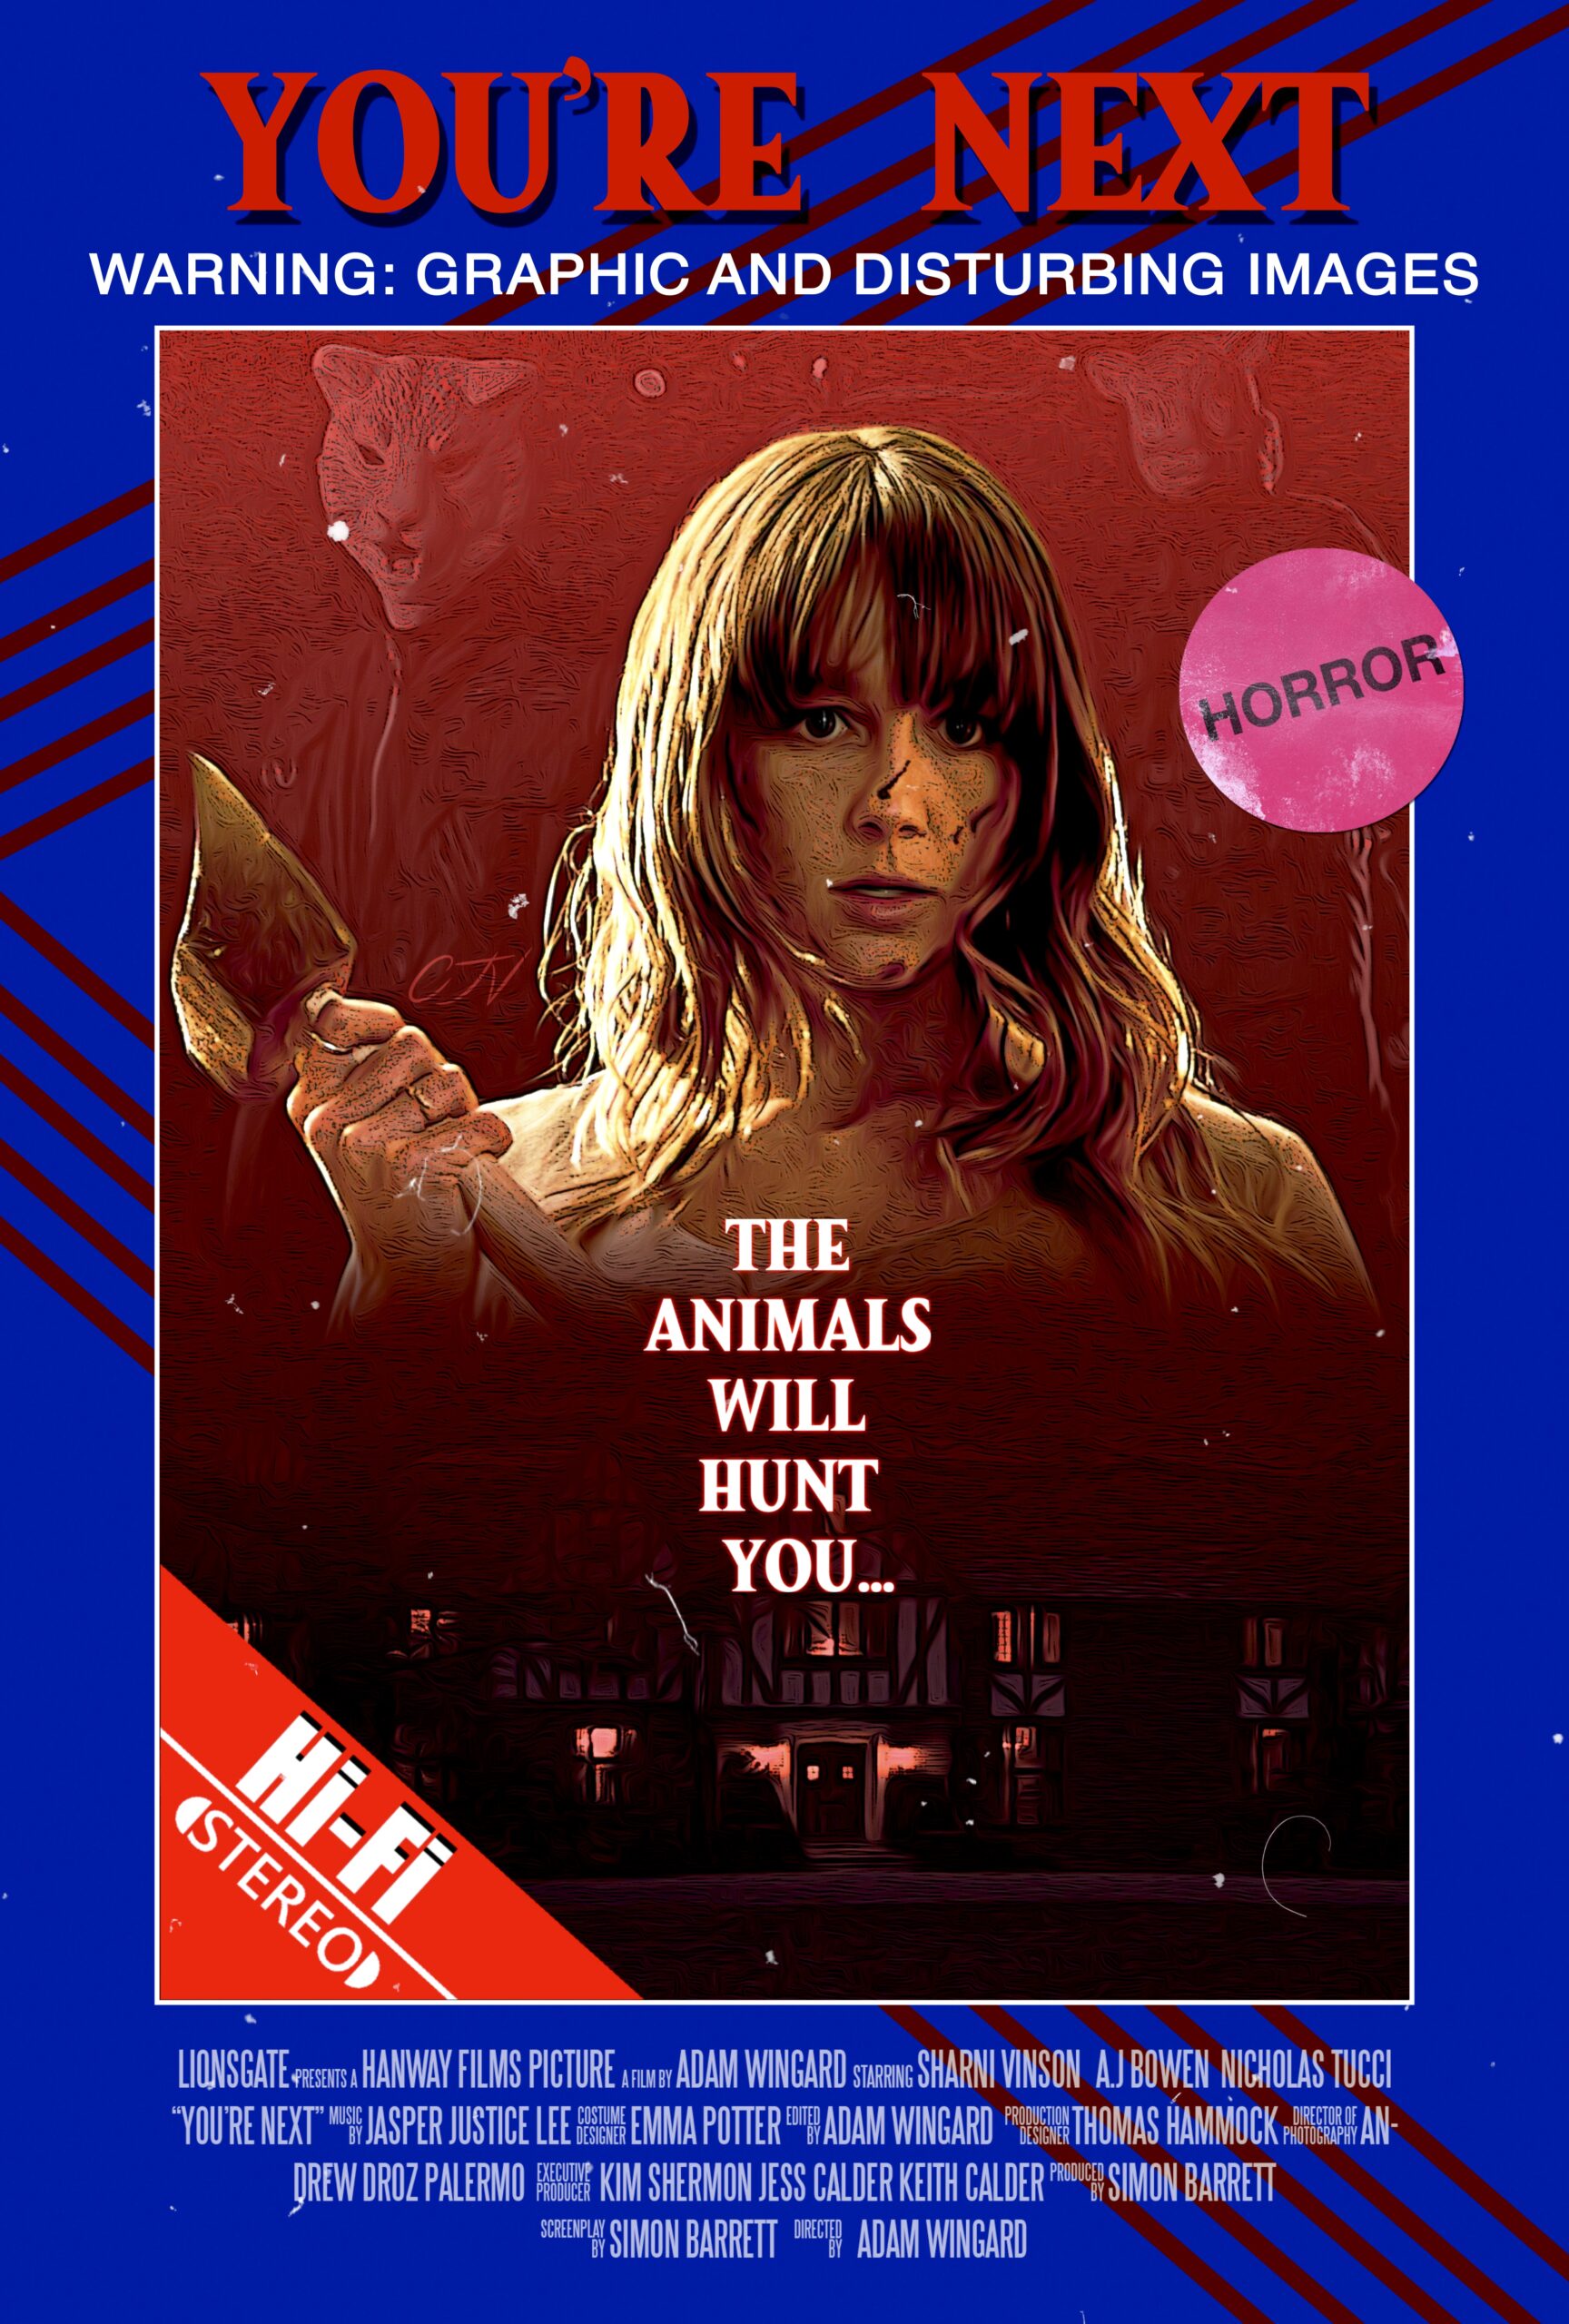 You’re Next (2011) Retro VHS Style Poster